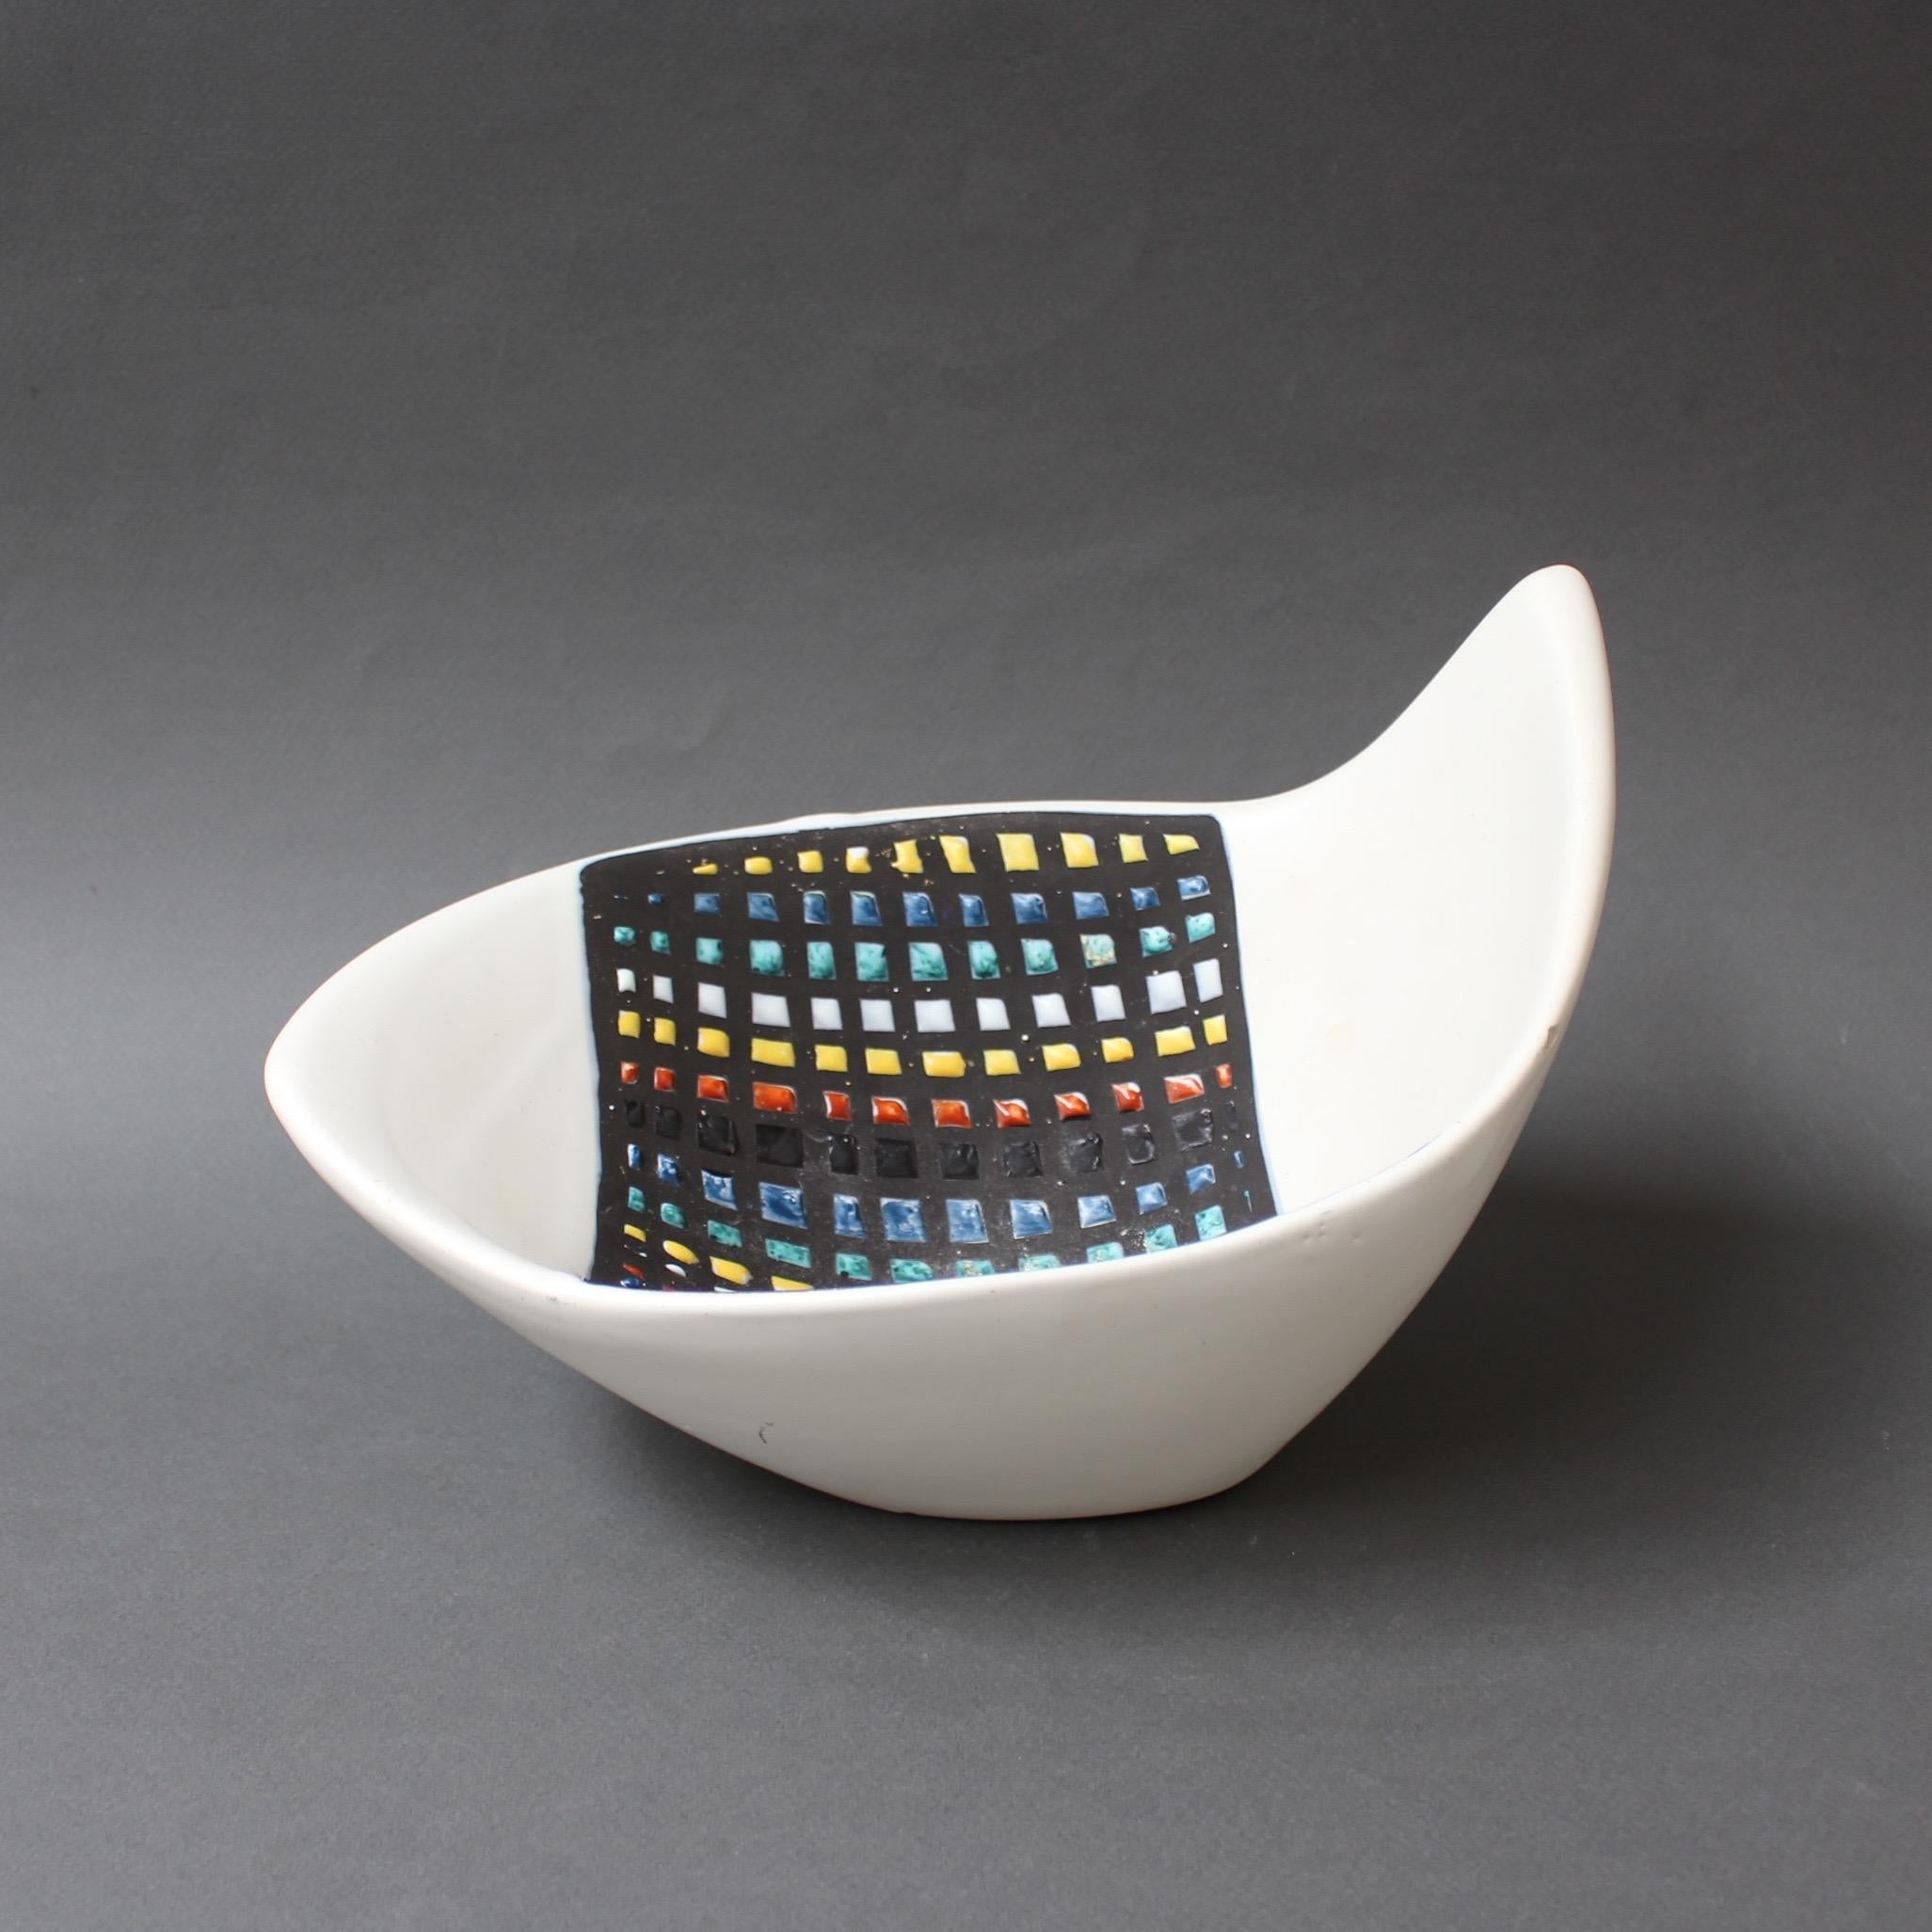 A decorative ceramic bowl by artist Roger Capron (1922 - 2006) who founded the craft-based workshop in Vallauris, France, l'Atelier Callis. Capron's creations contributed to a veritable renaissance of pottery and ceramics in that era and he left